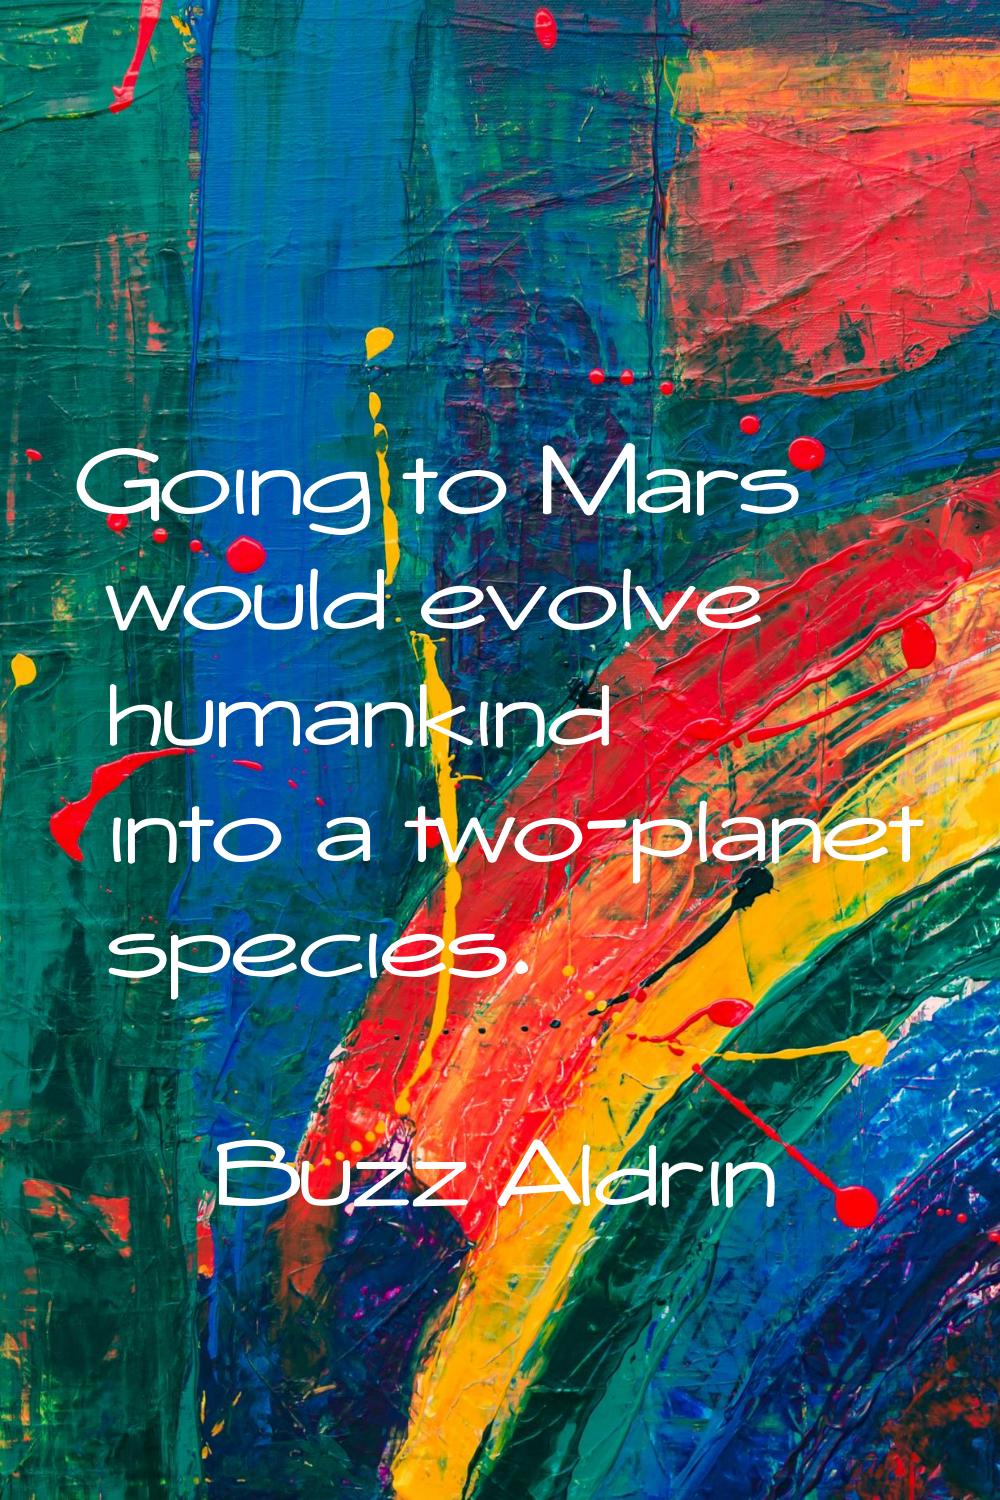 Going to Mars would evolve humankind into a two-planet species.